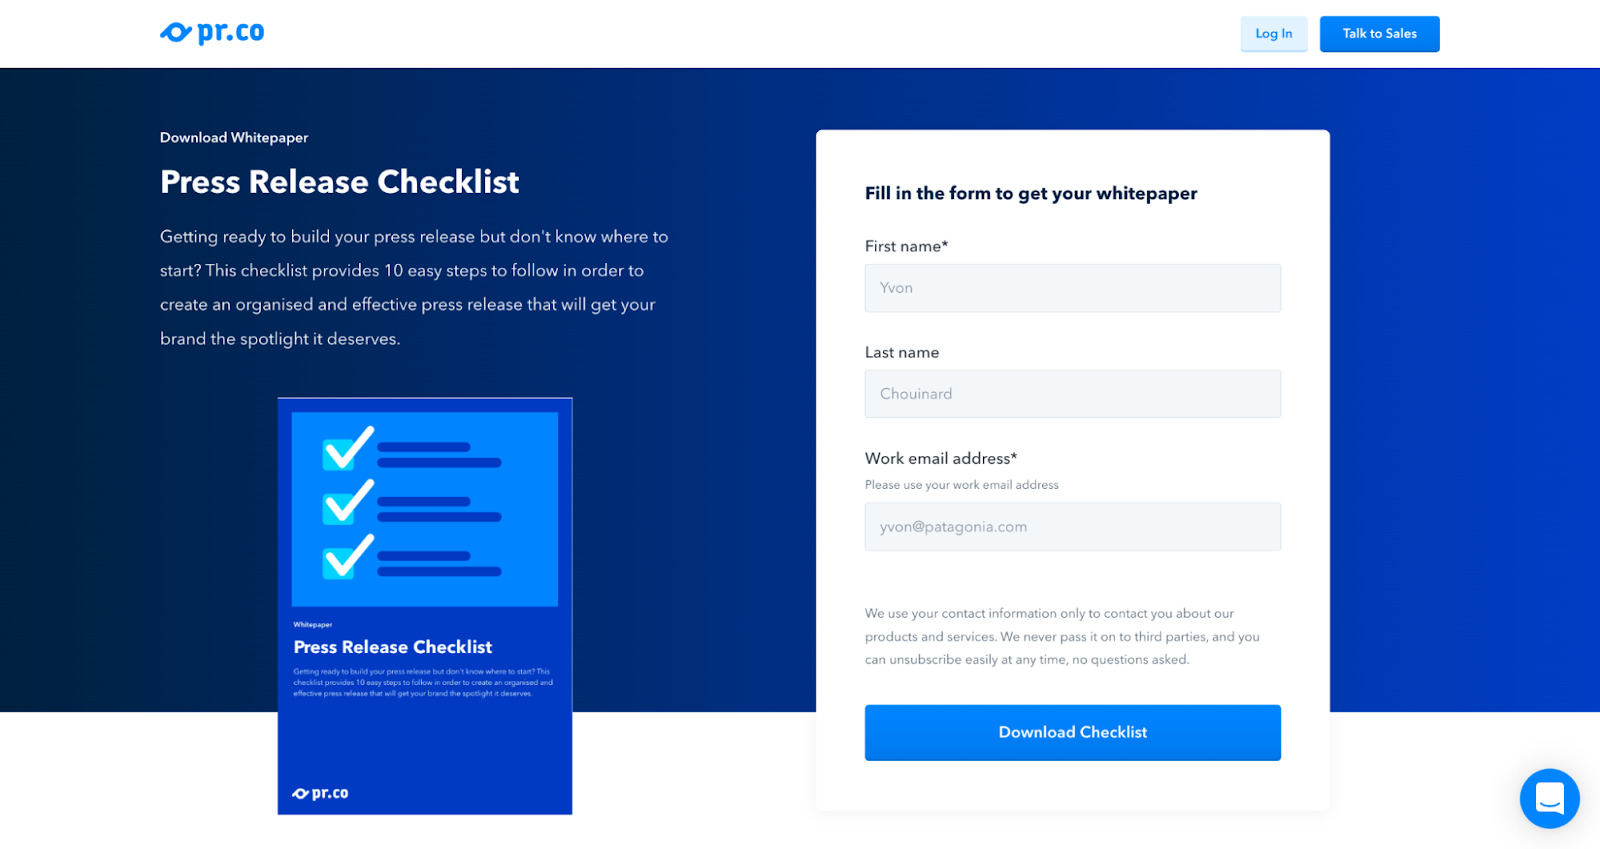 Text field to enter personal details to access the checklist